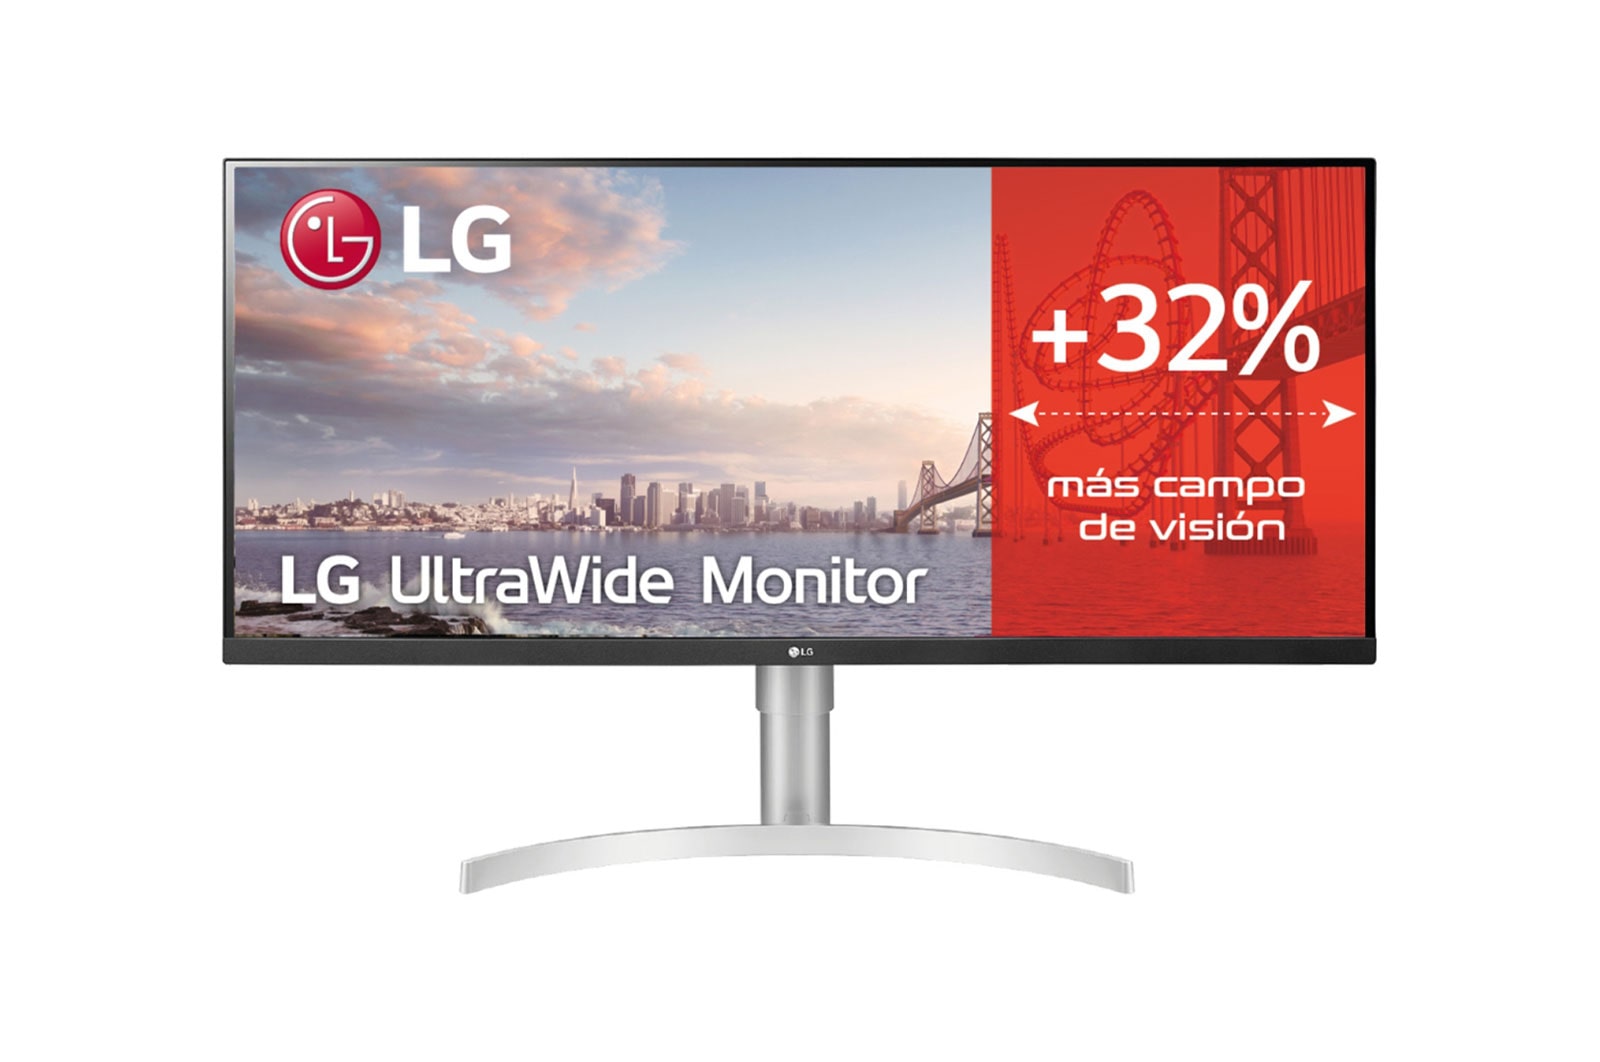 LG 34WN650-W - Monitor Ultrapanoramico 21:9 LG UltraWide (Panel IPS: 2560x1080, 400cd/m², 1000:1, sRGB>99%); diag. 86,72cm; entr.: HDMIx2, DPx1; altavoces 2x7W;  Ajust. en altura e inclinación., 34WN650-W